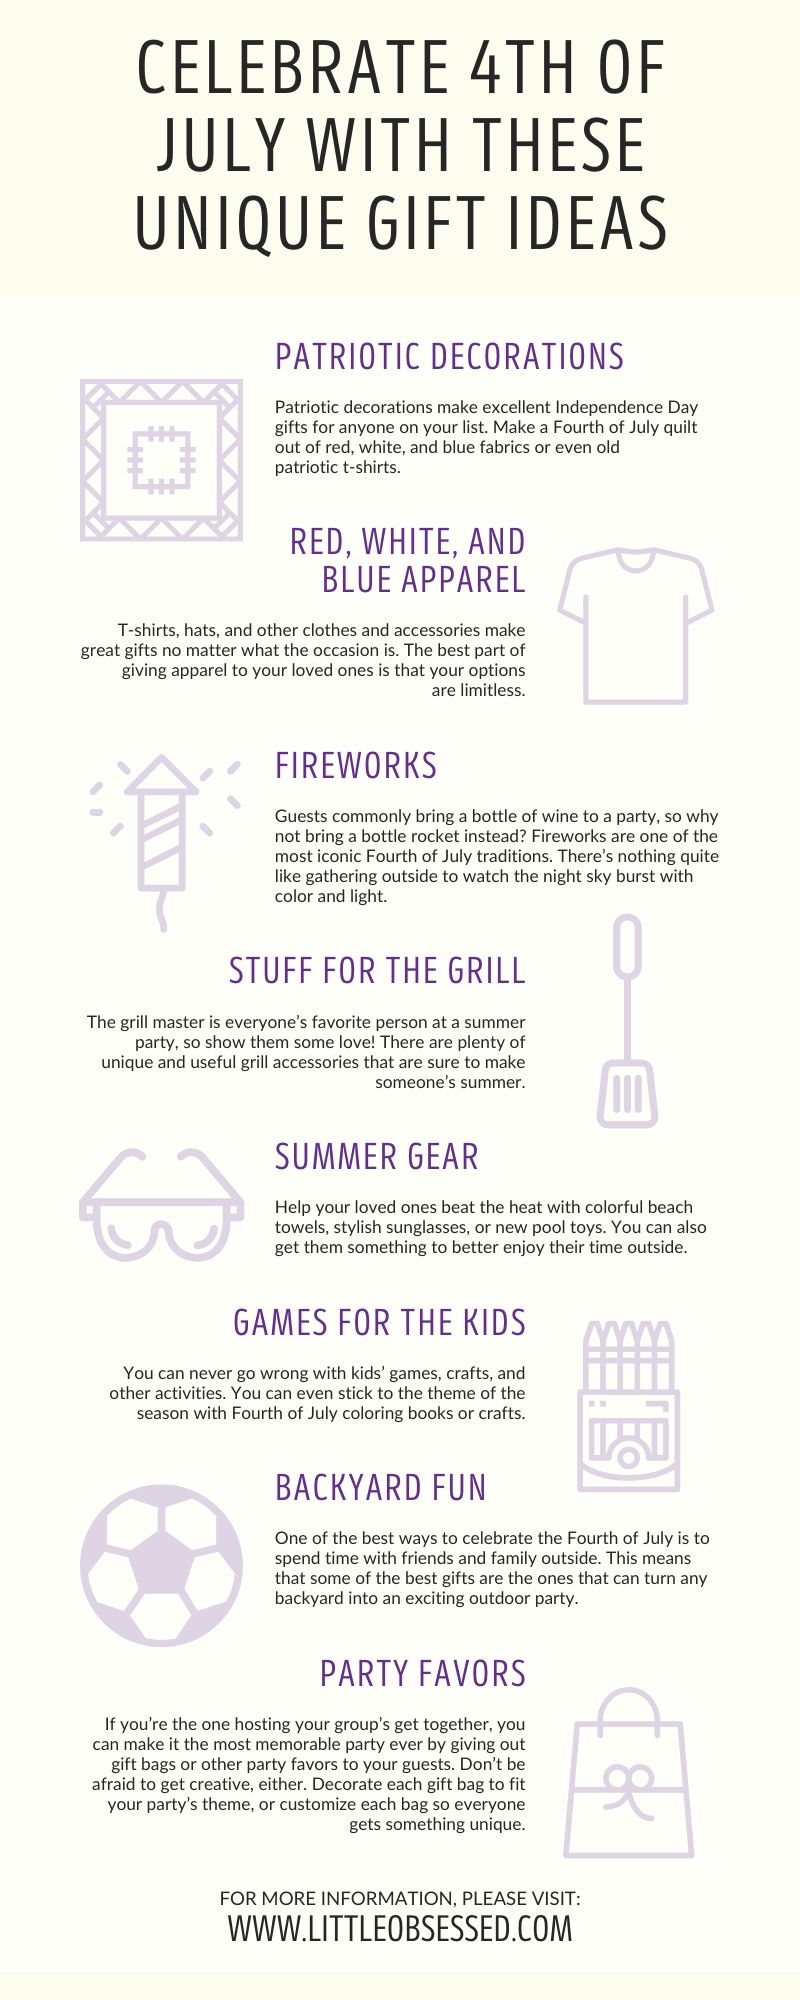 Celebrate 4th of July With These Unique Gift Ideas